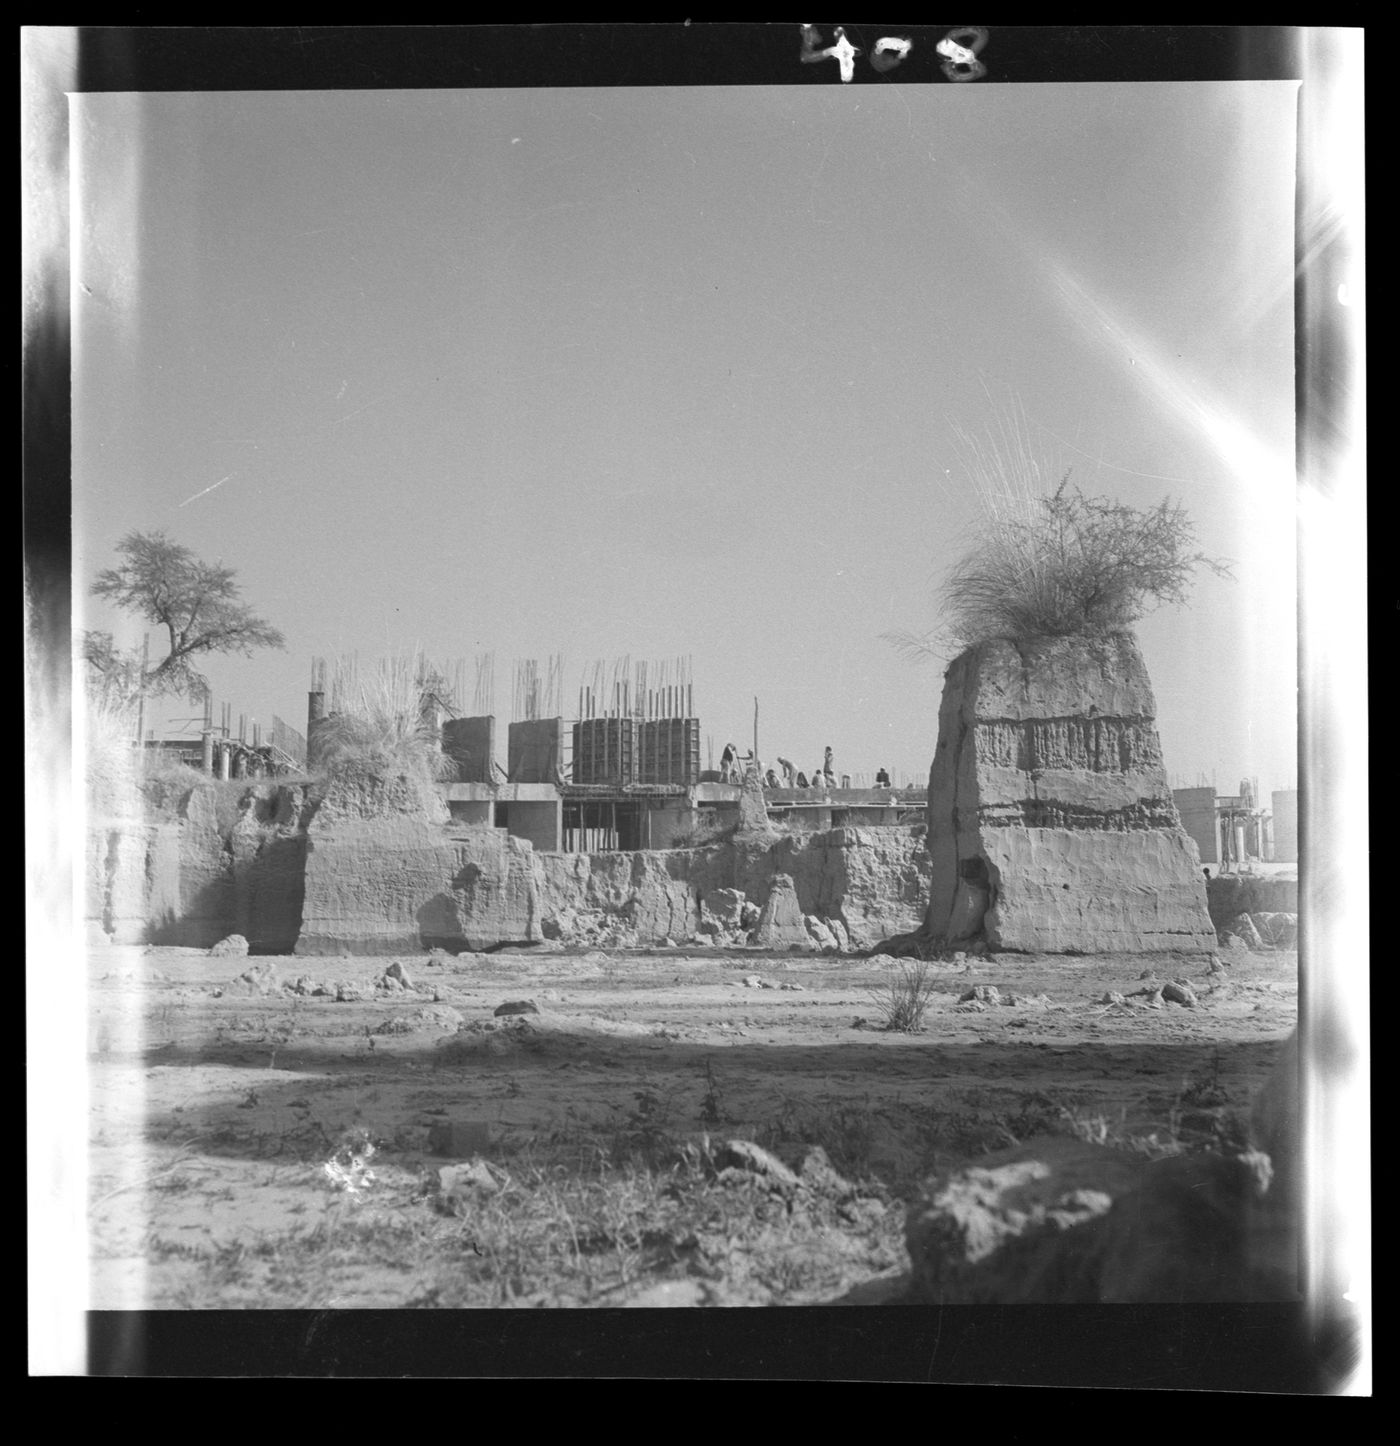 View of an unidentified building under construction, possibly in Chandigarh, India